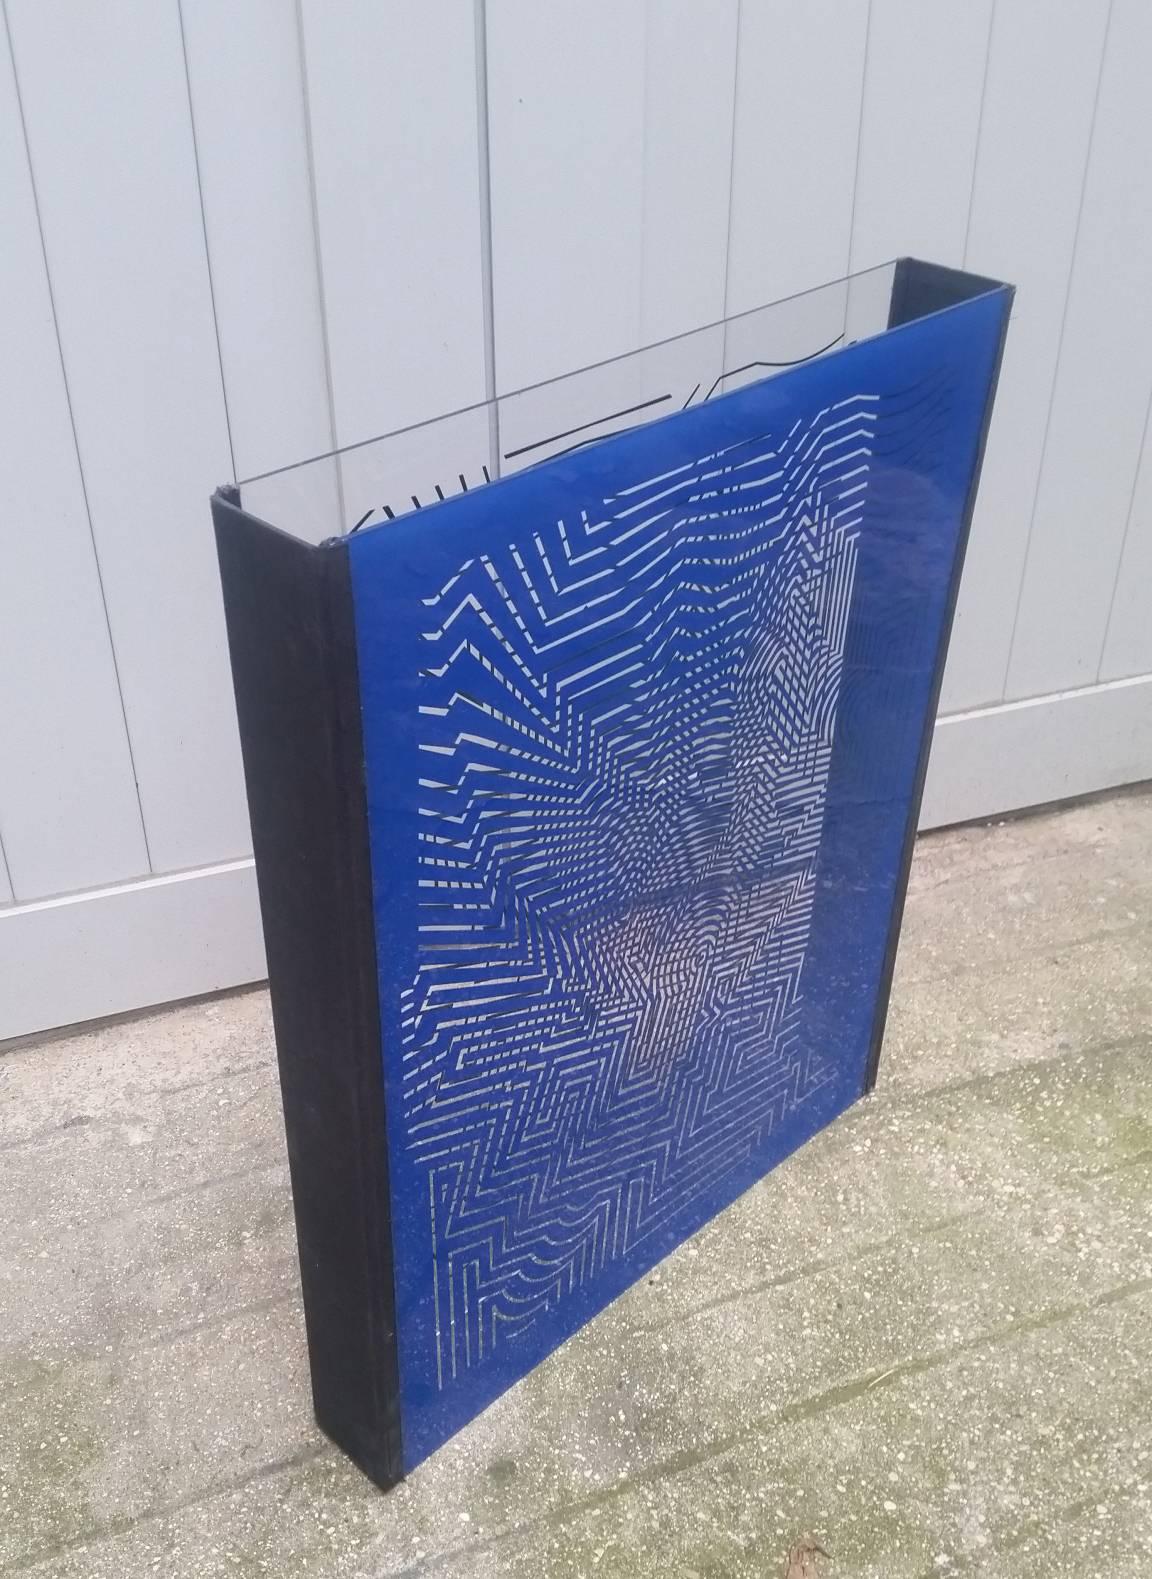 Exceptional and rare sculpture of Vasarely.
made up of 2 silkscreen prints on plexiglas connected by a fabric ribbon.
edition of 120
very great and beautiful work.
Superb condition, except for a few scratches on the plexiglass.
the handwritten